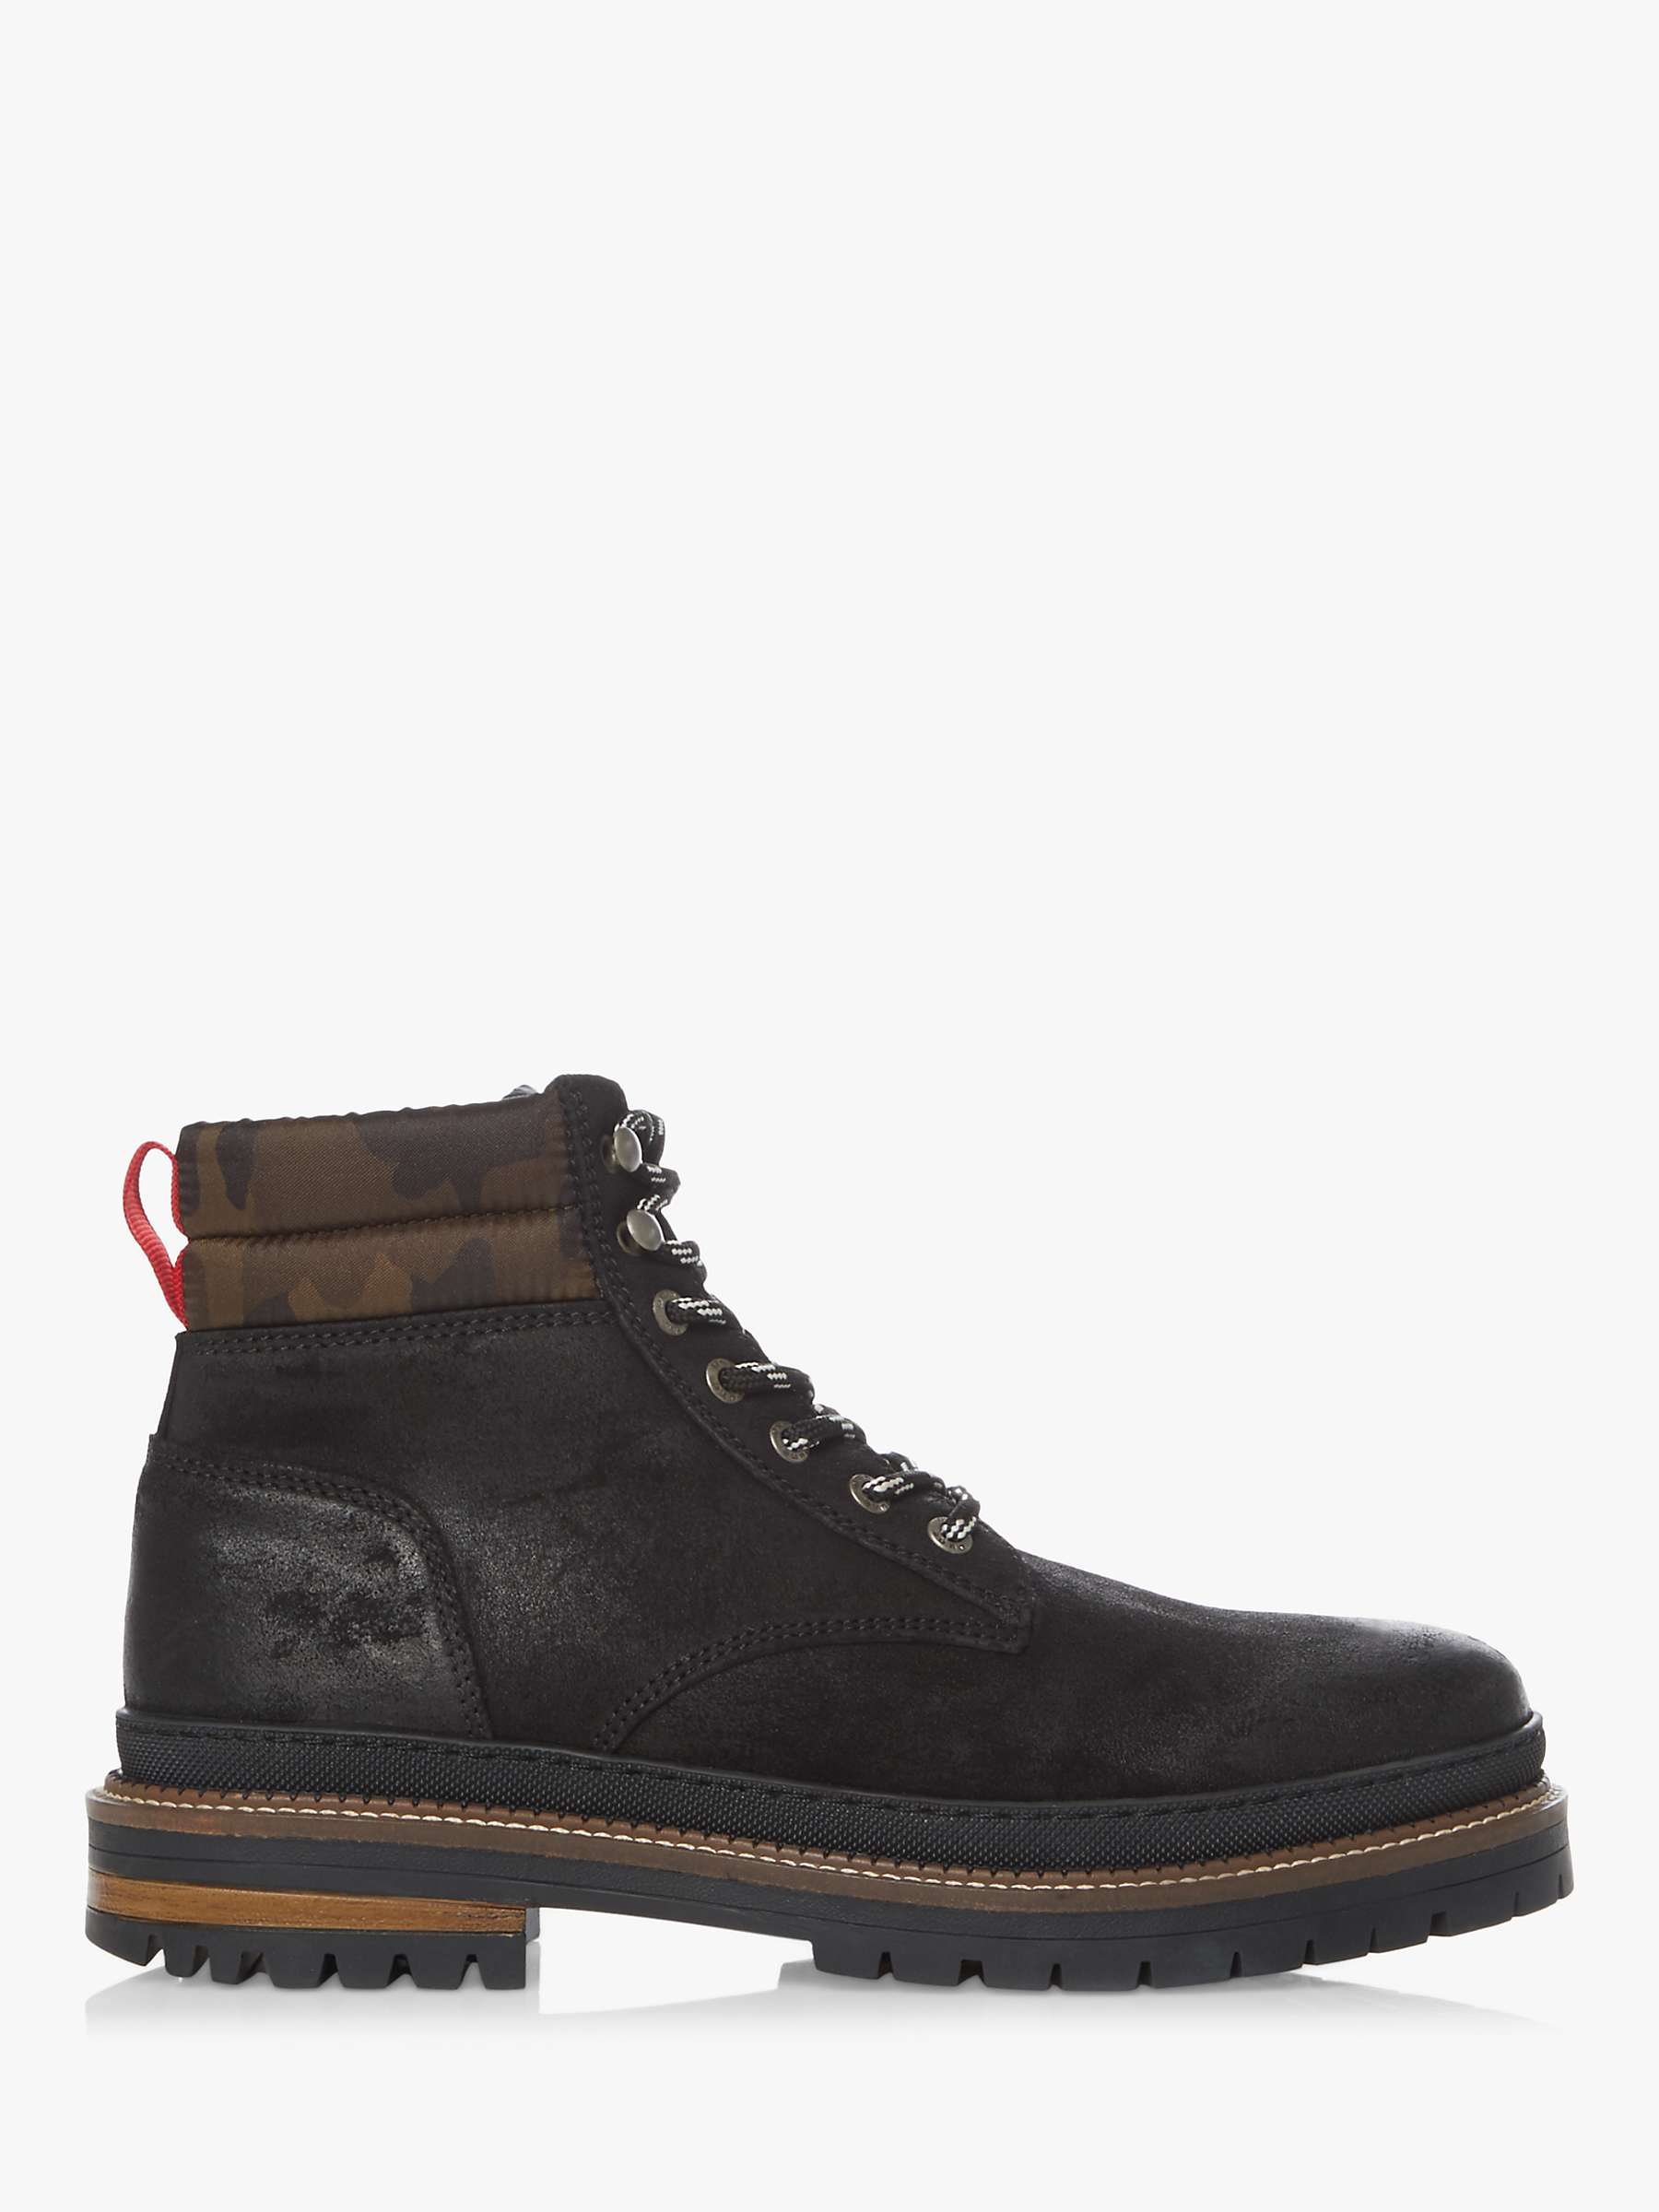 Buy Dune Cordial Suede Chunky Hiker Boots, Black Online at johnlewis.com